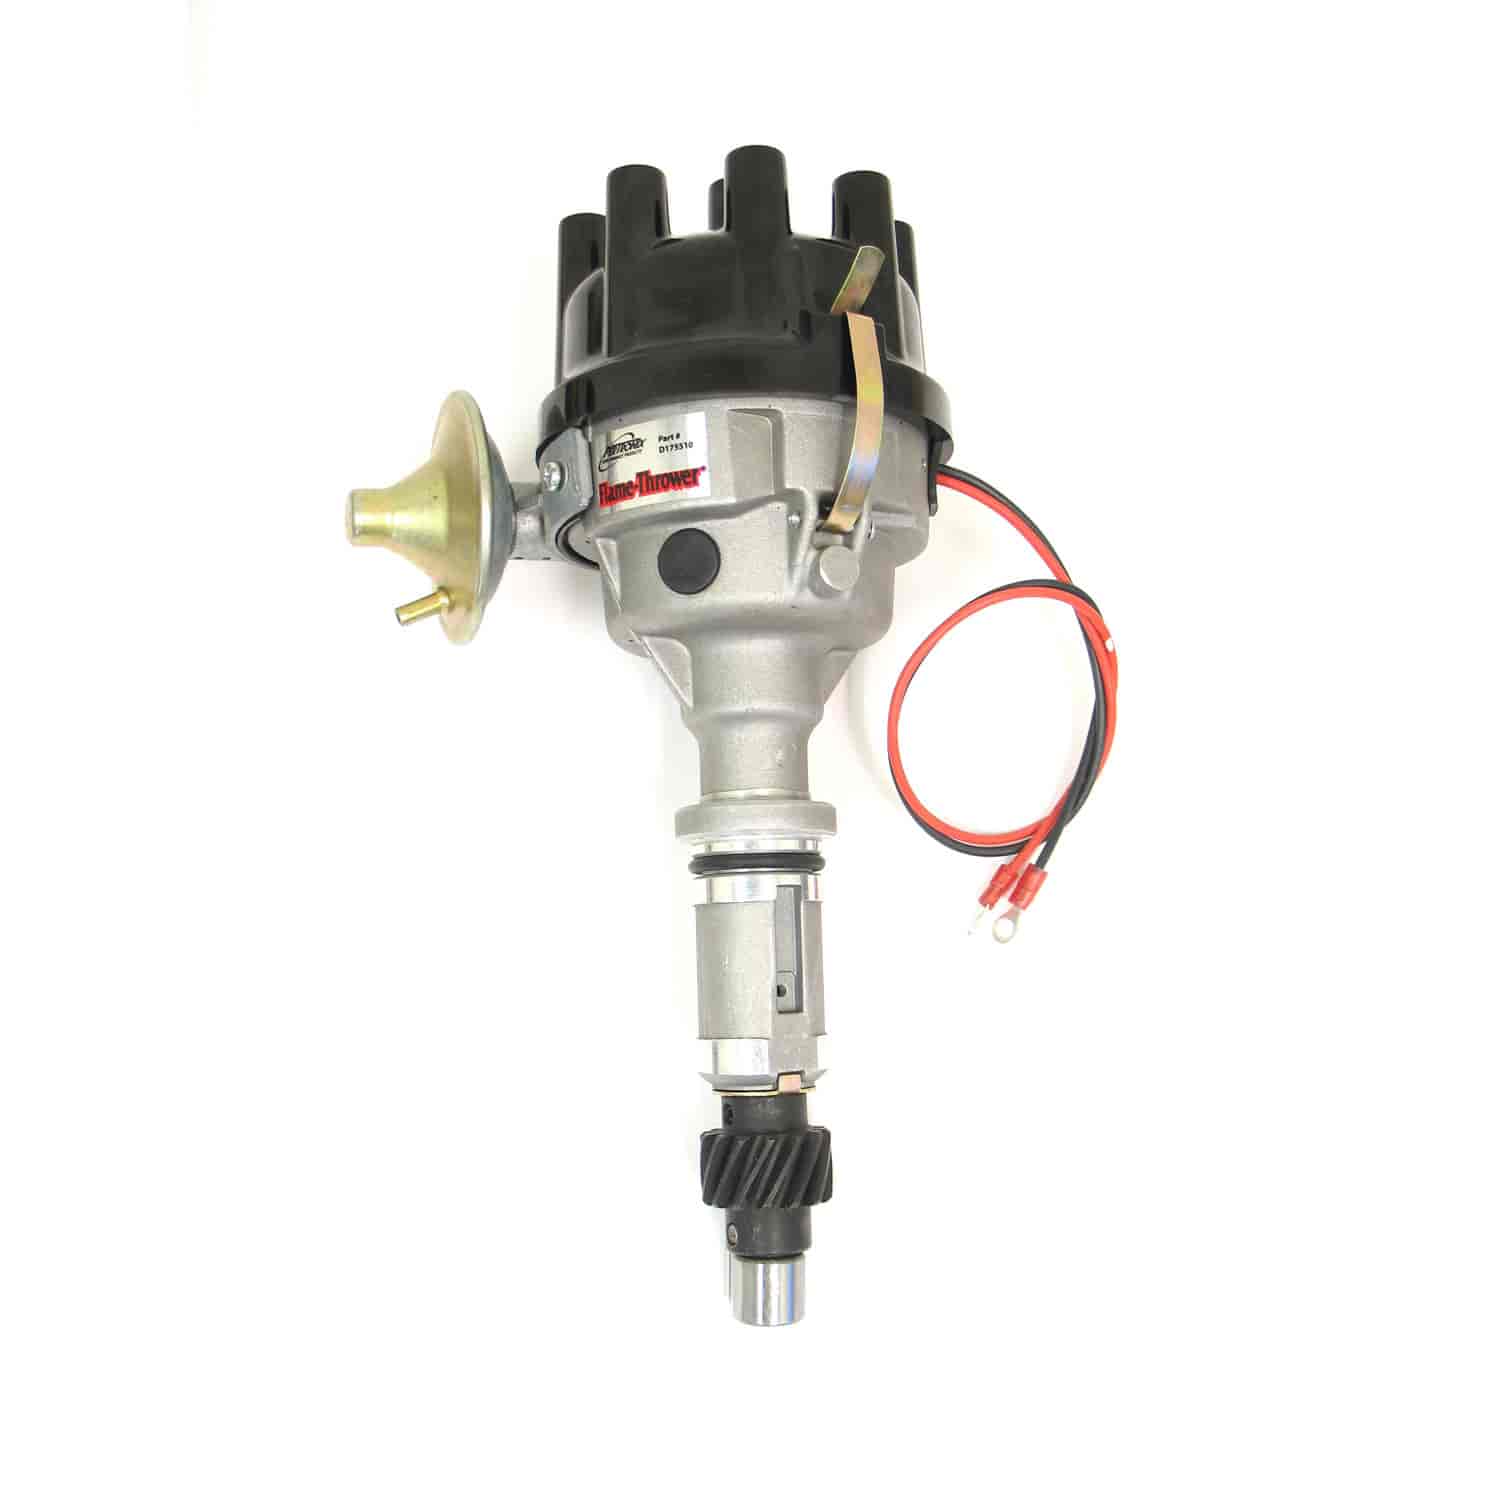 Dist Rover 8 cyl Ignitor Carb Approved D-57-23